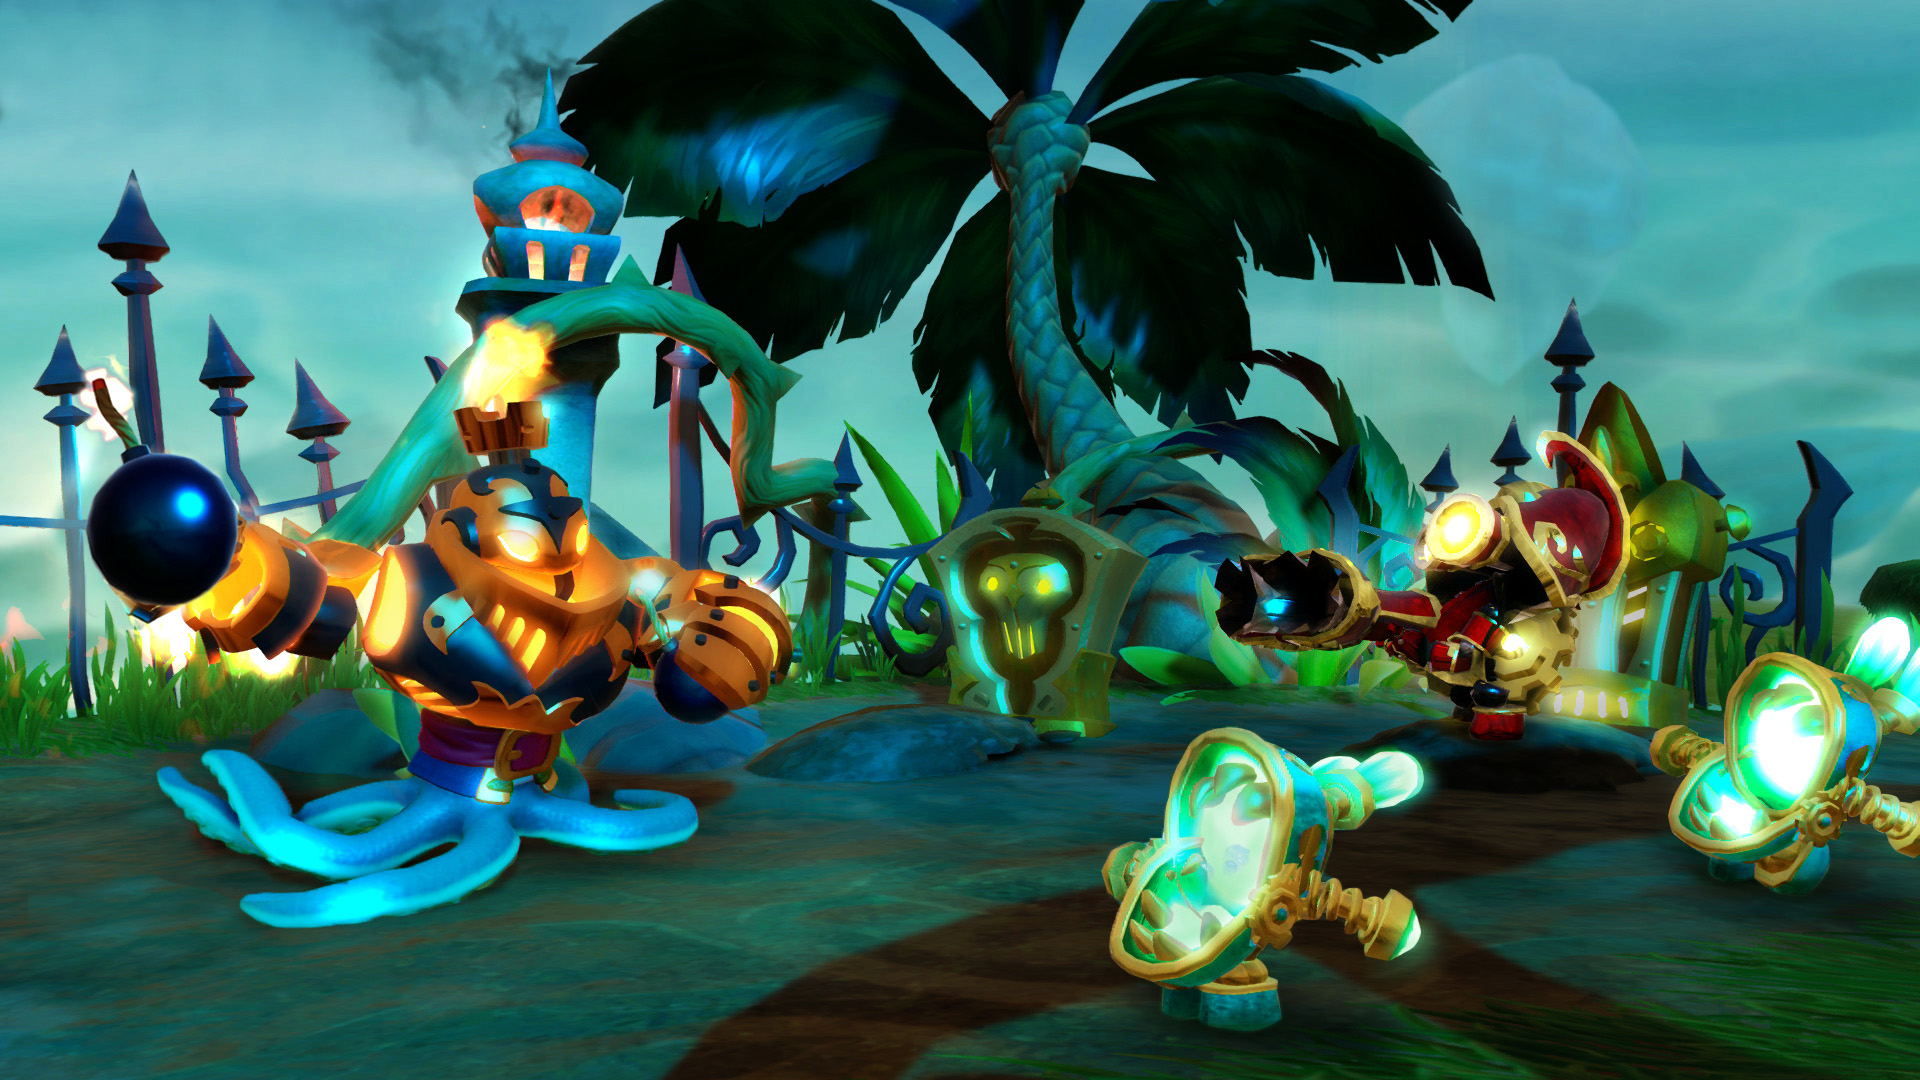 I’ve Played Skylanders On The PS4, And There’s No Going Back